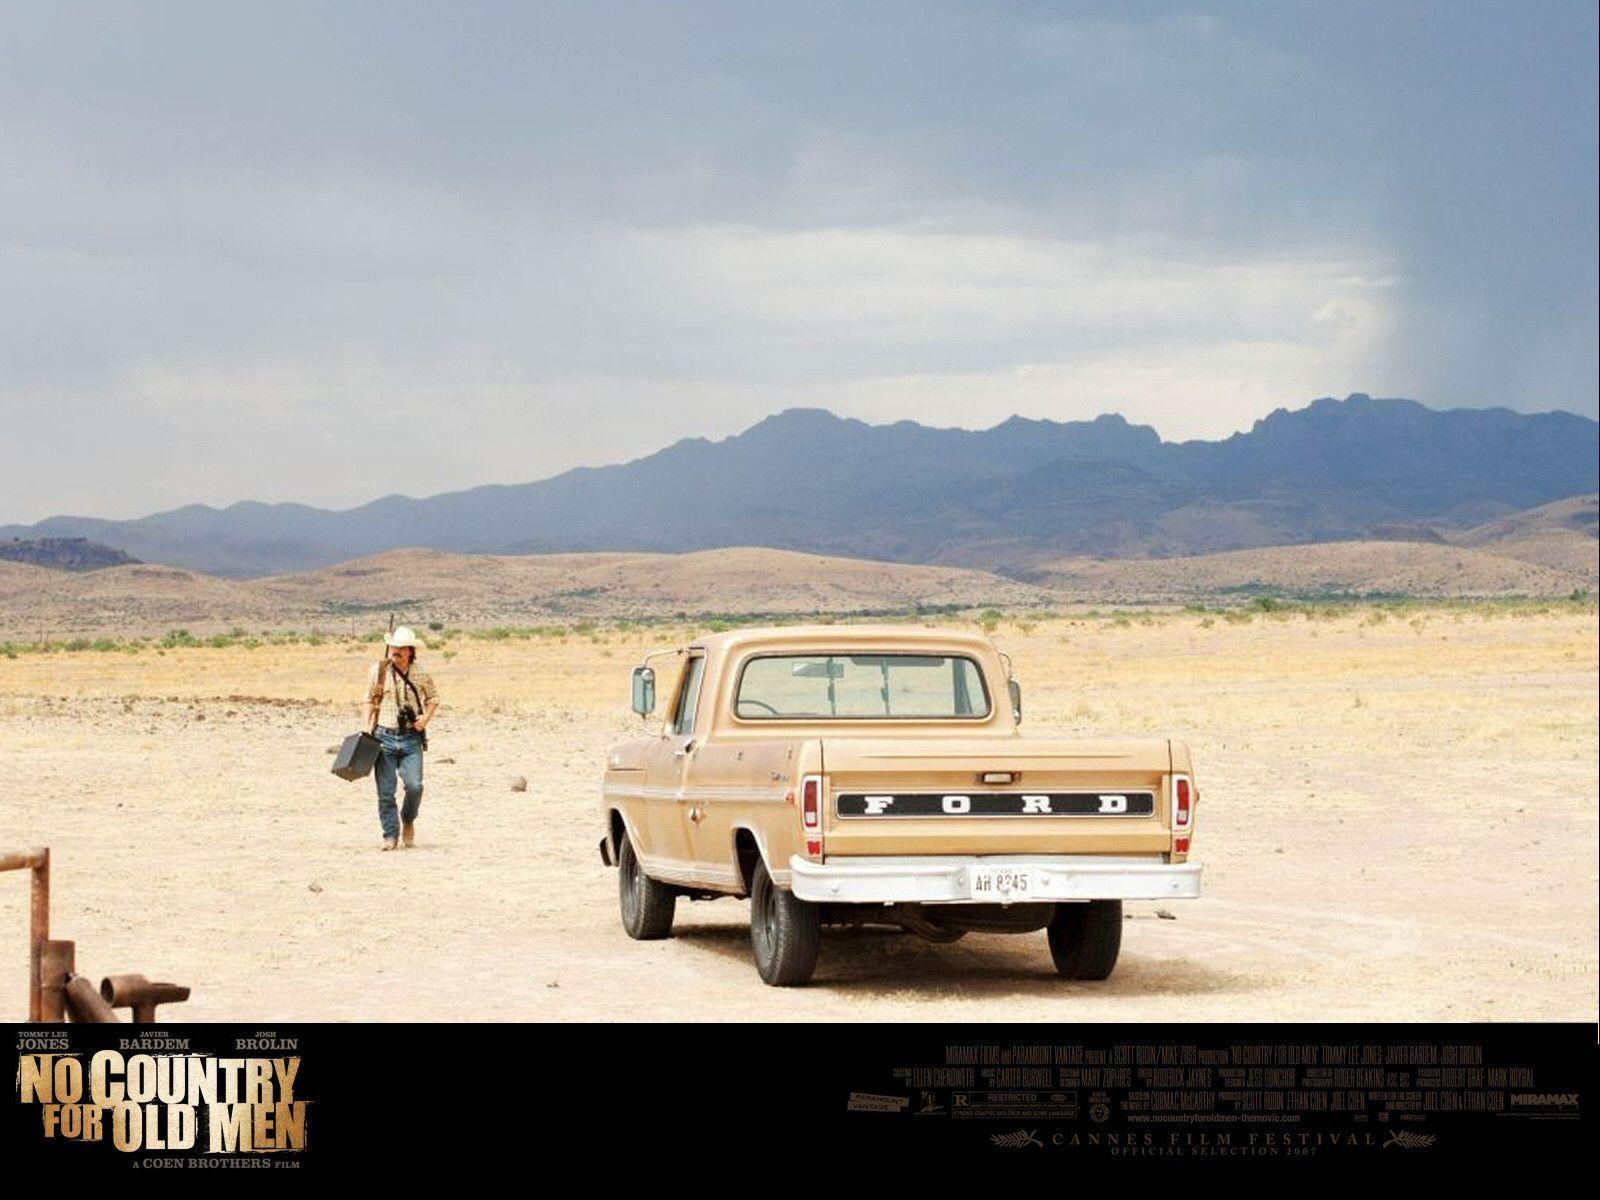 No Country for Old Men Wallpaper. HD Wallpaper Base